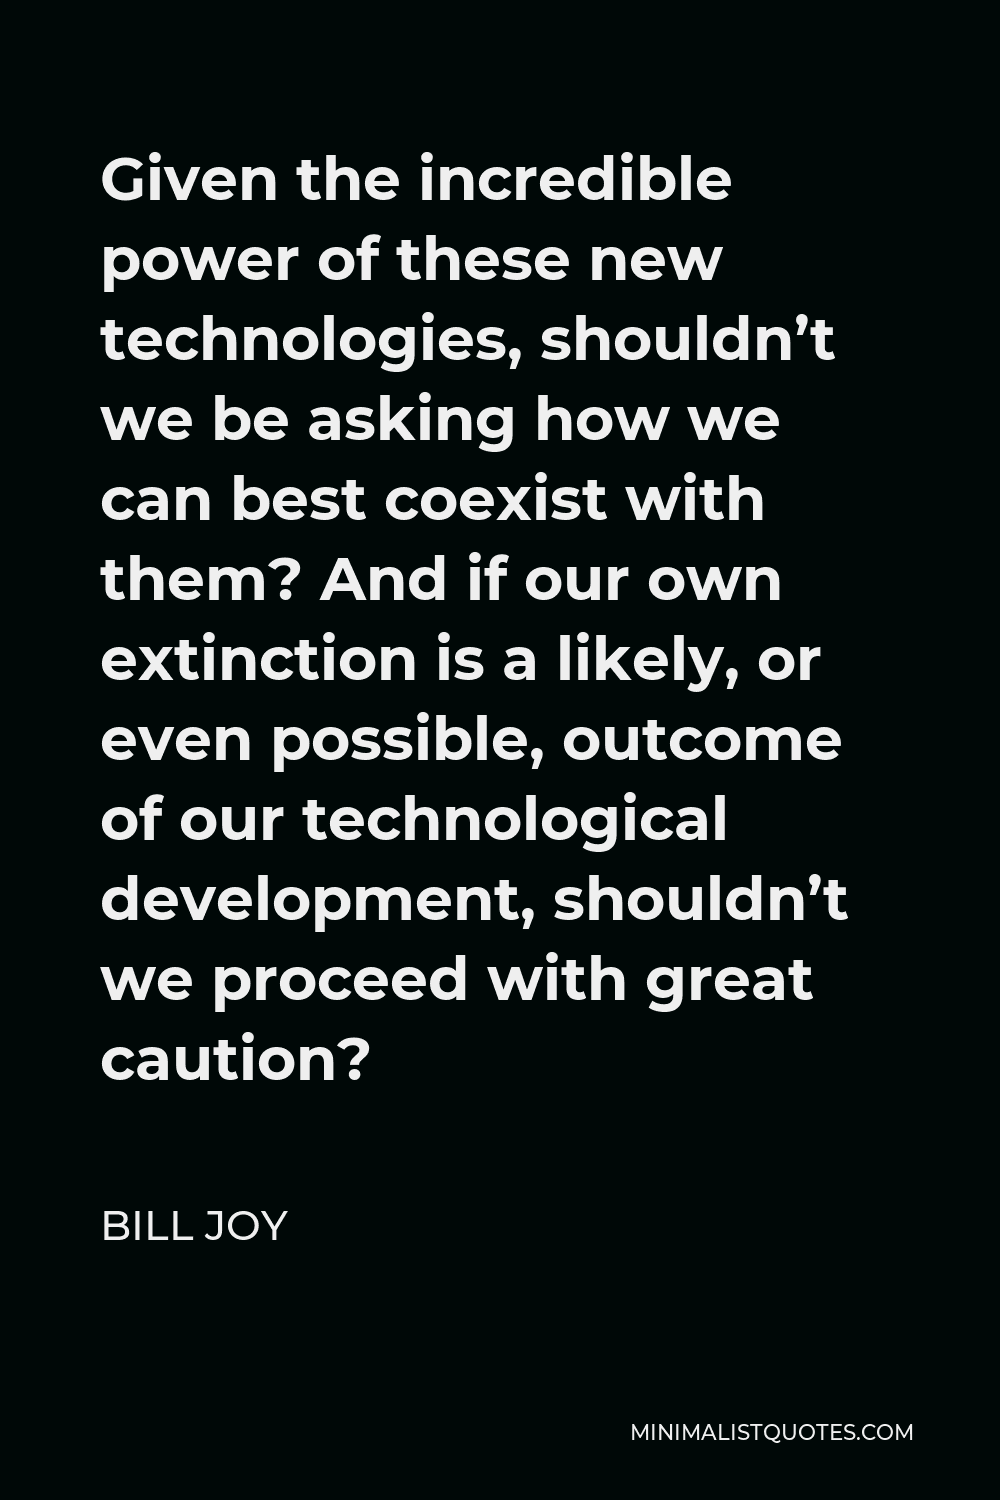 Bill Joy Quote - Given the incredible power of these new technologies, shouldn’t we be asking how we can best coexist with them? And if our own extinction is a likely, or even possible, outcome of our technological development, shouldn’t we proceed with great caution?